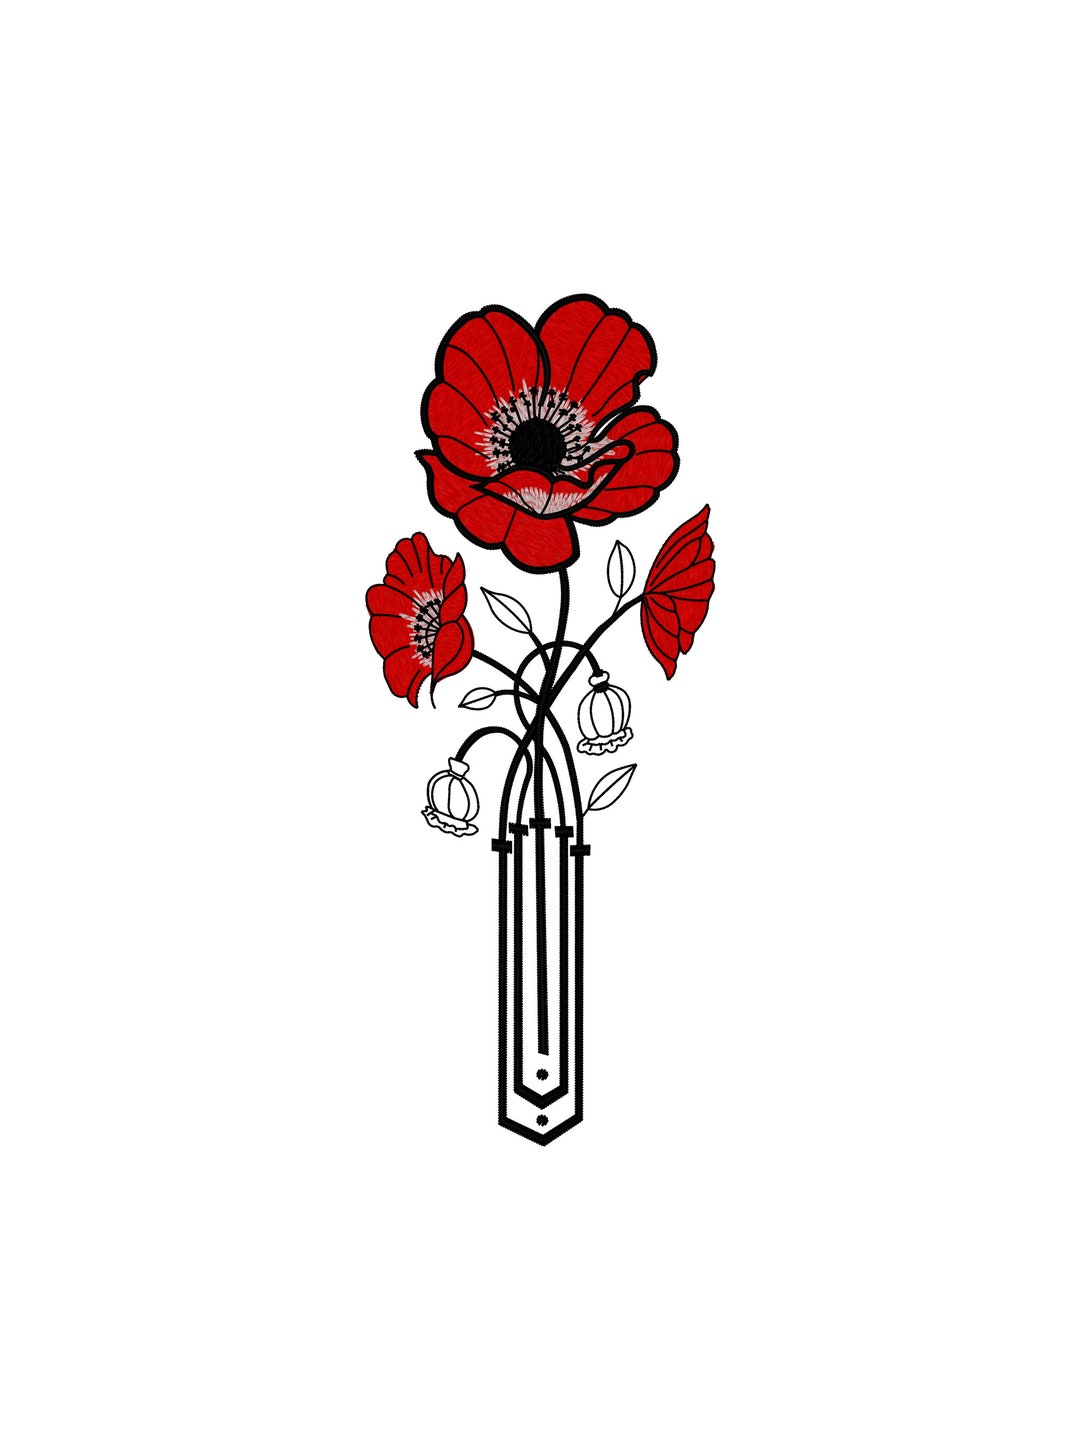 Poppy Art Deco Machine Embroidery Design. Flowers Embroidery - Etsy